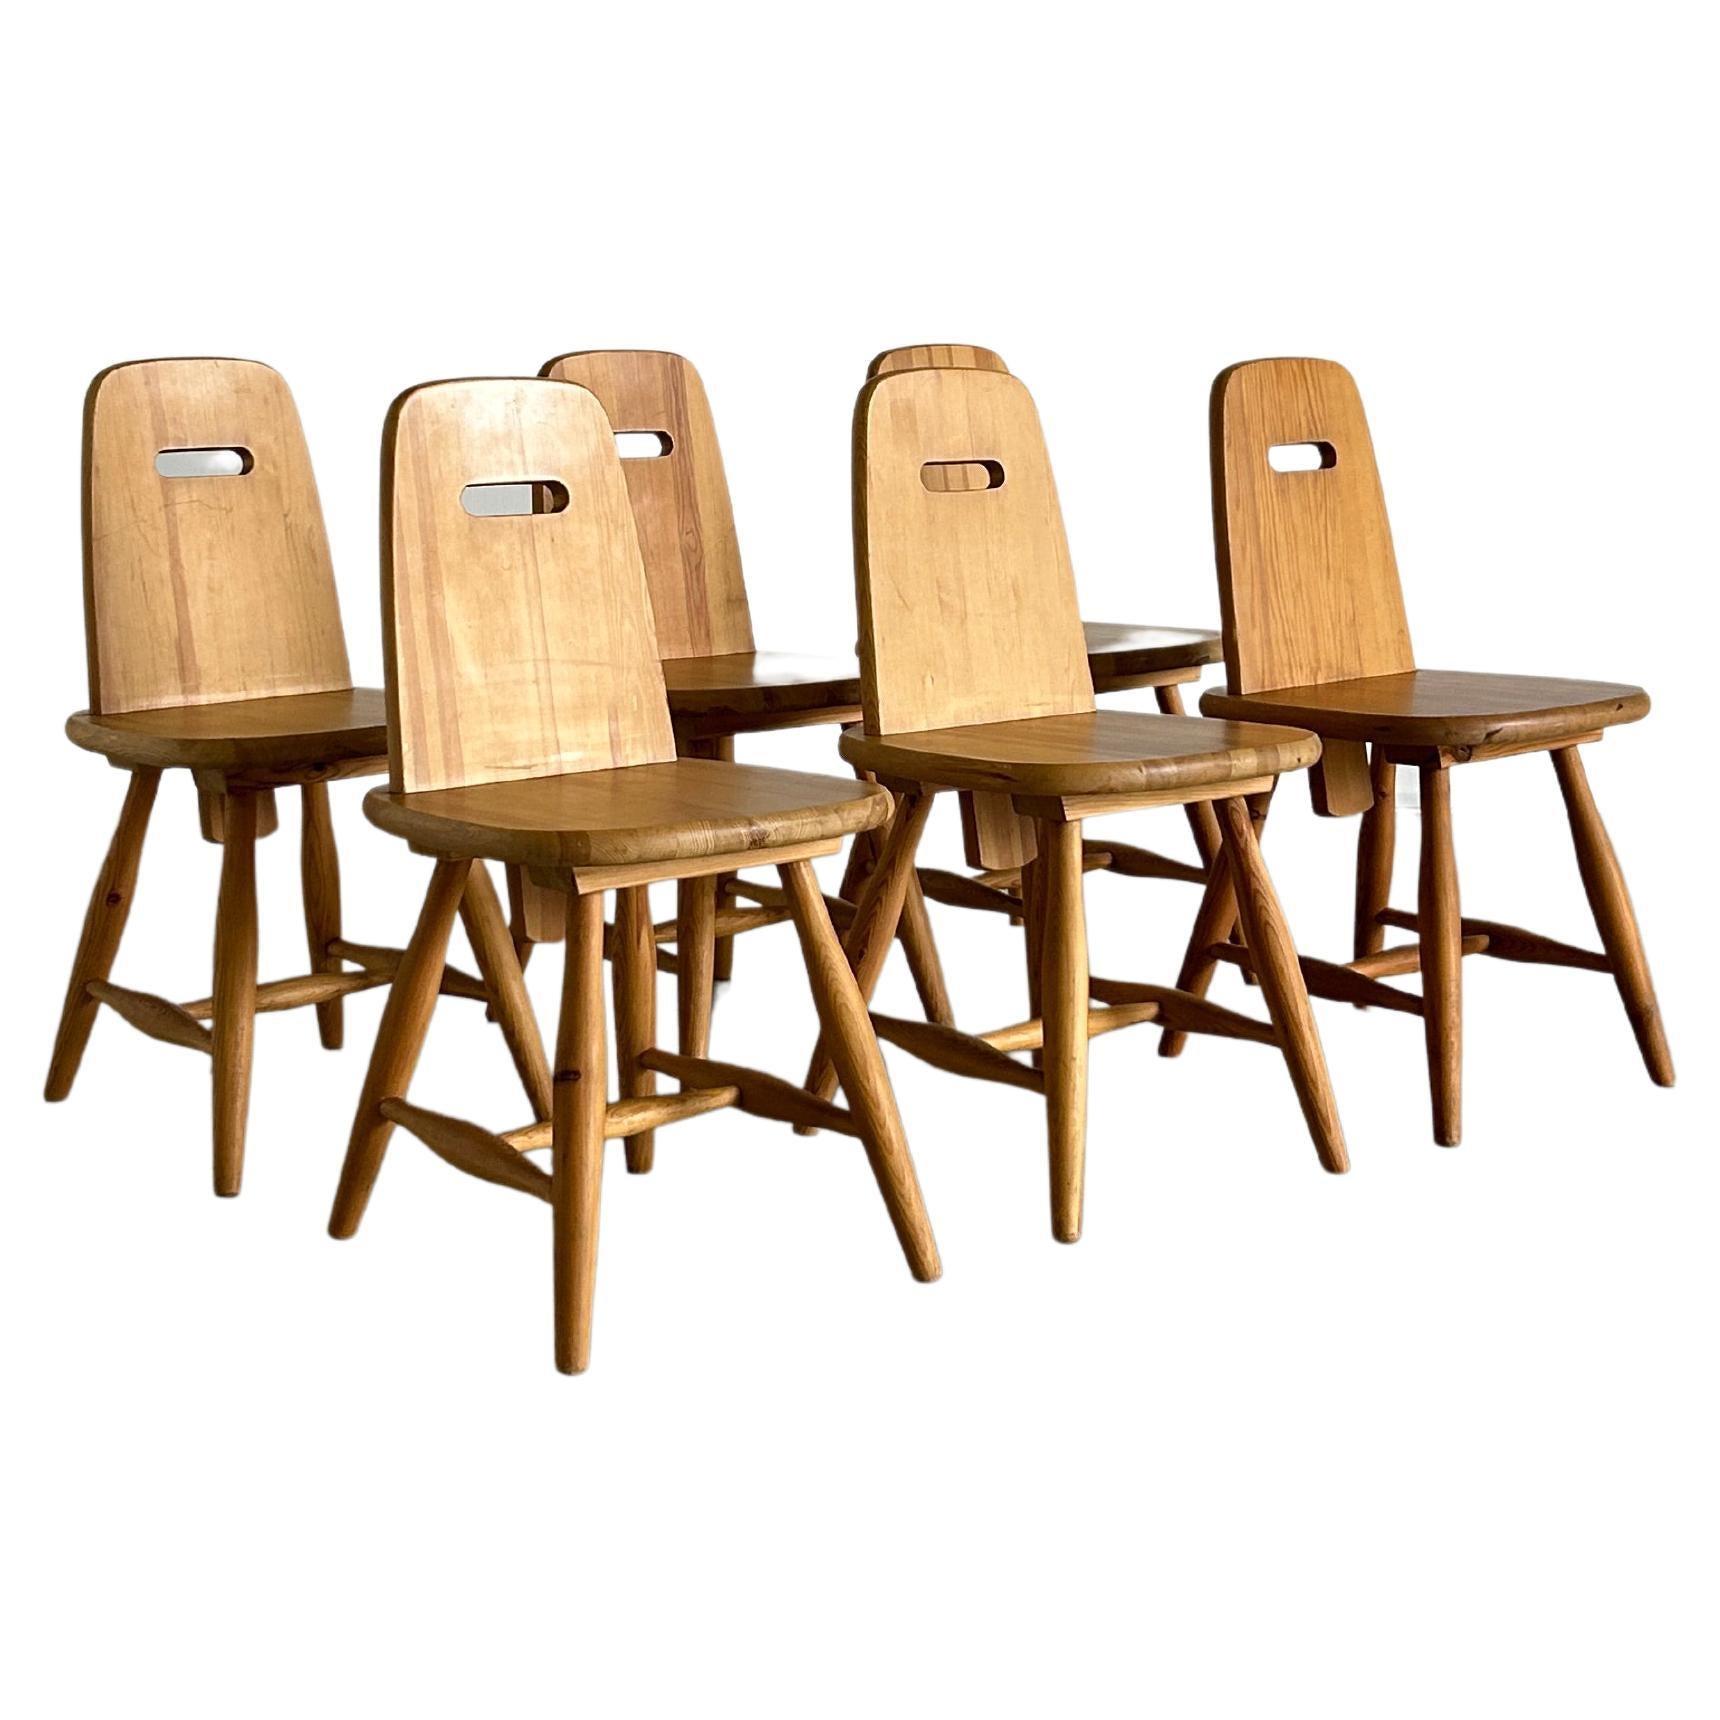 Eero Aarnio for Laukaan Puu, set of six dining chairs, solid pine, Finland, 1960s.

This set of six Finnish dining chairs holds a strong expression and has an organic design with rounded corners and edges. The legs are high and tapered which